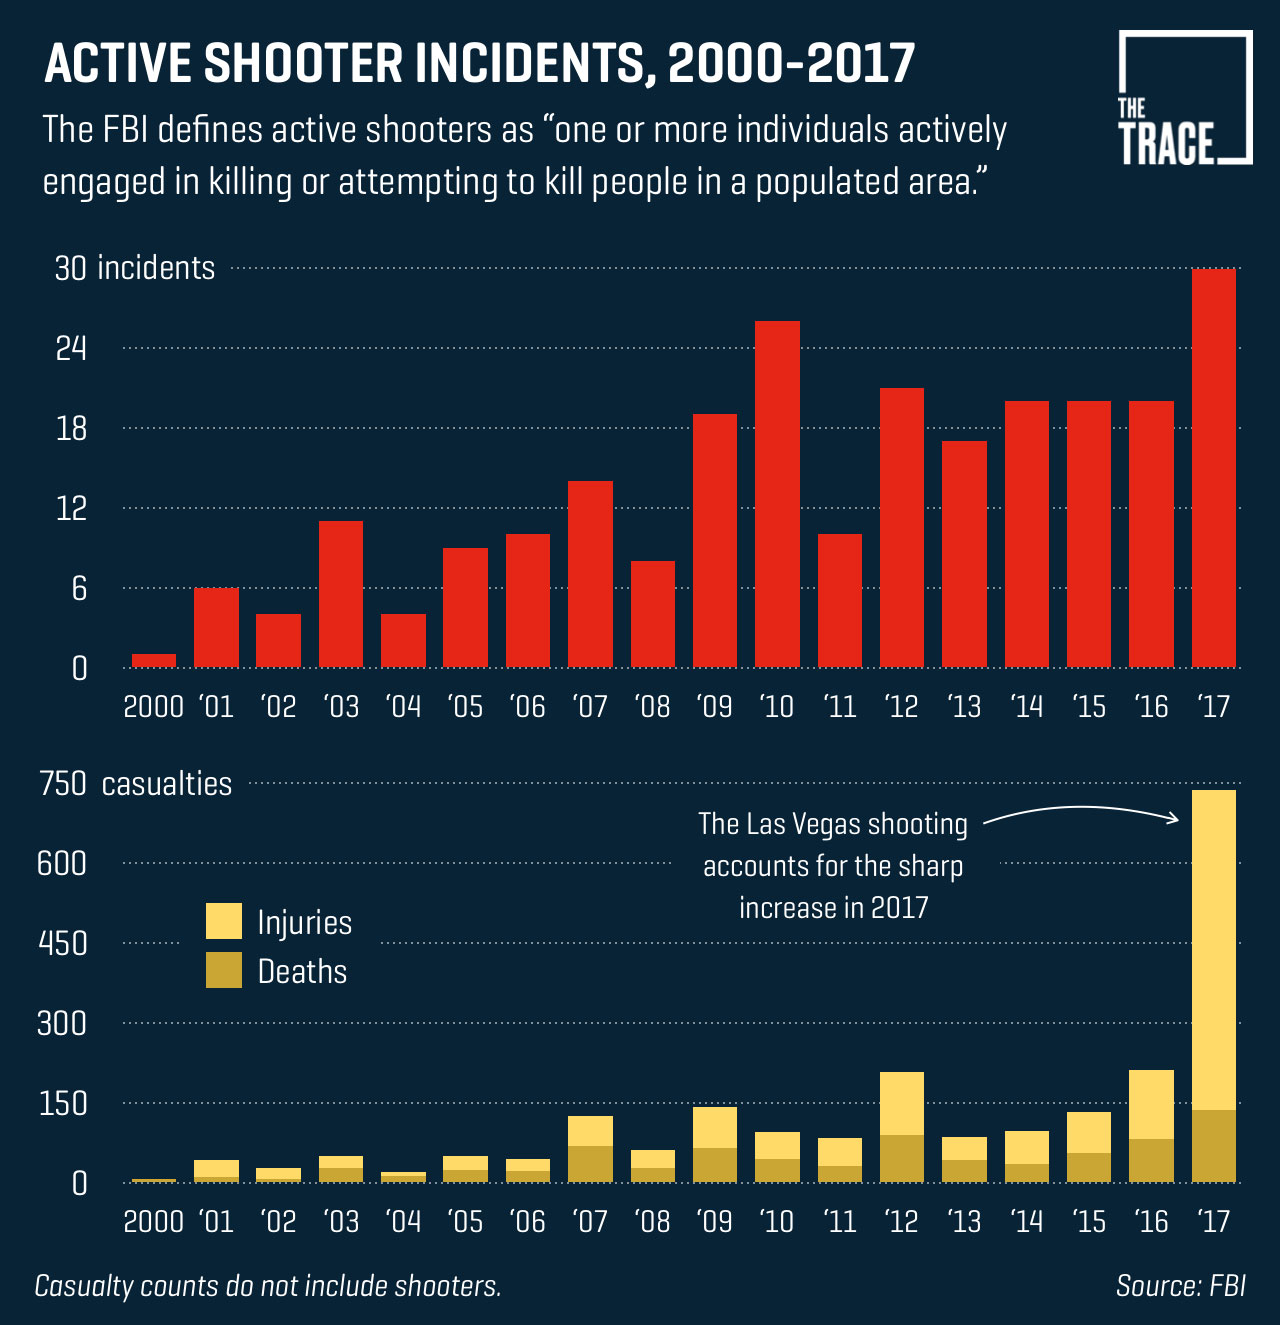 Bulletin New Fbi Data Shows Active Shooters Caused Nearly 750 Casualties In 2017